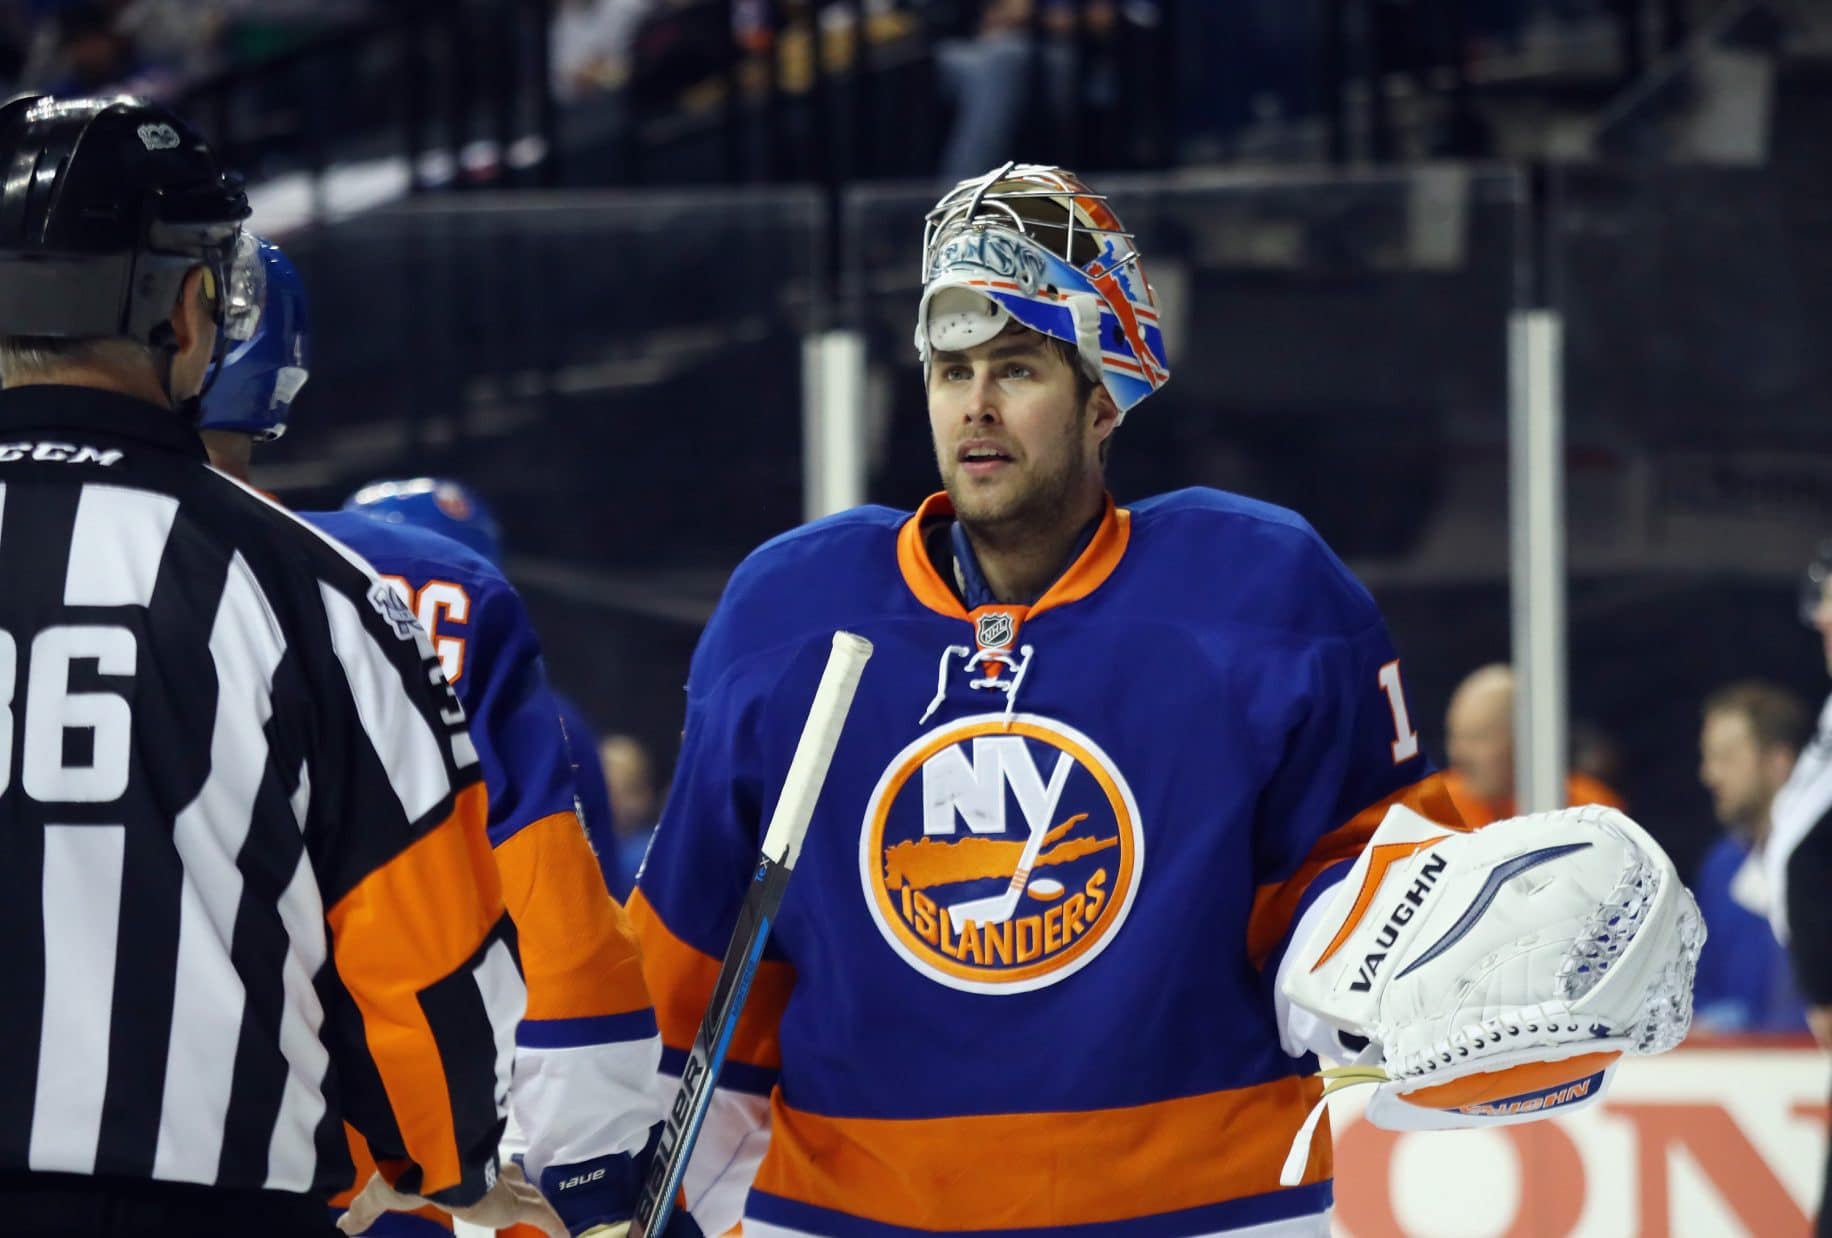 Fuhgettaboutit: St. Louis Blues Defeat New York Islanders 3-2 In Shootout (Highlights) 